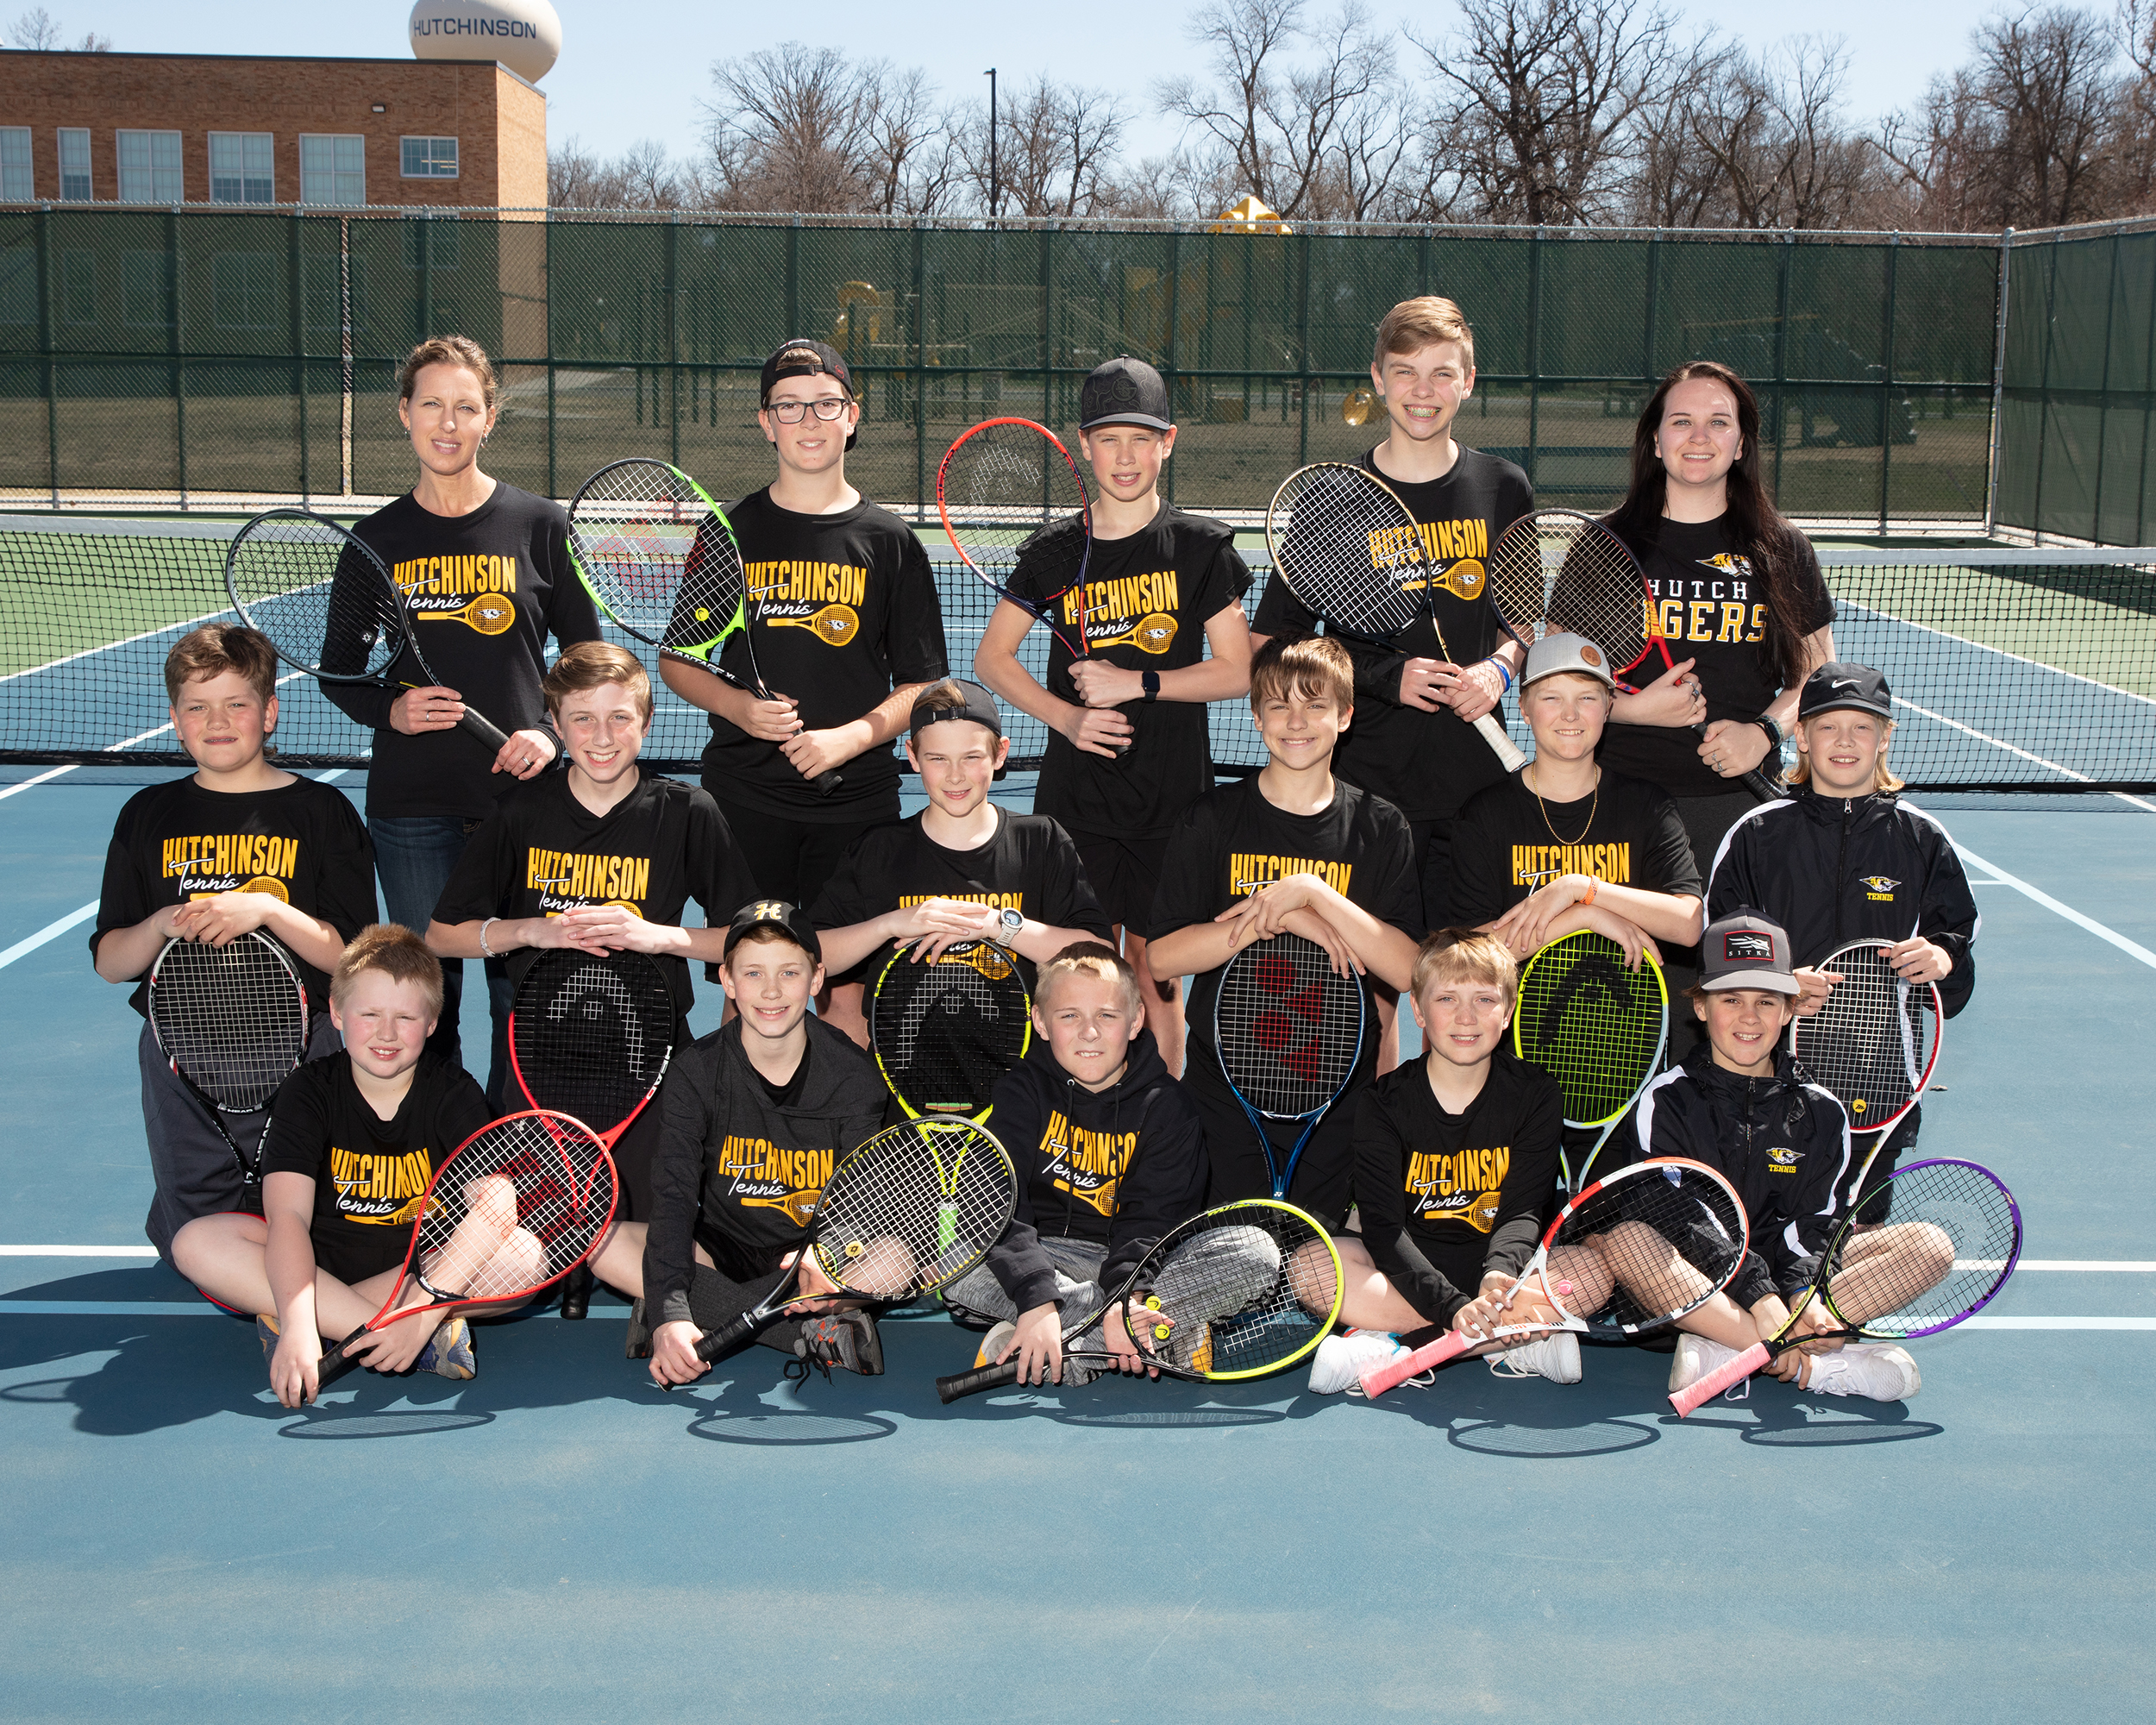 group photo of middle school boys tennis team